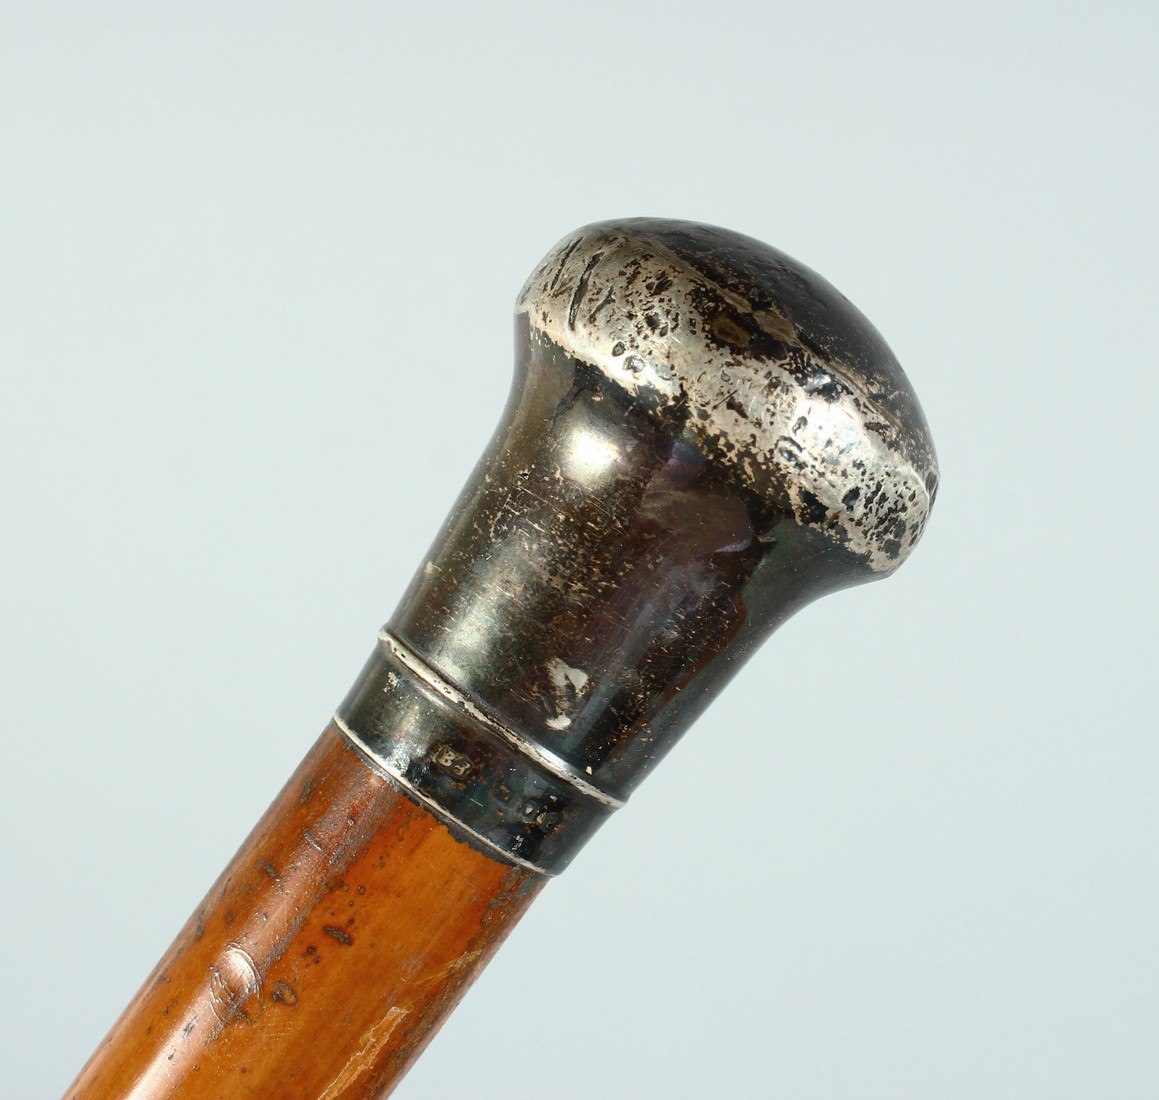 AN EDWARD VII CANE with plain silver handle. London 1901, 35ins long.